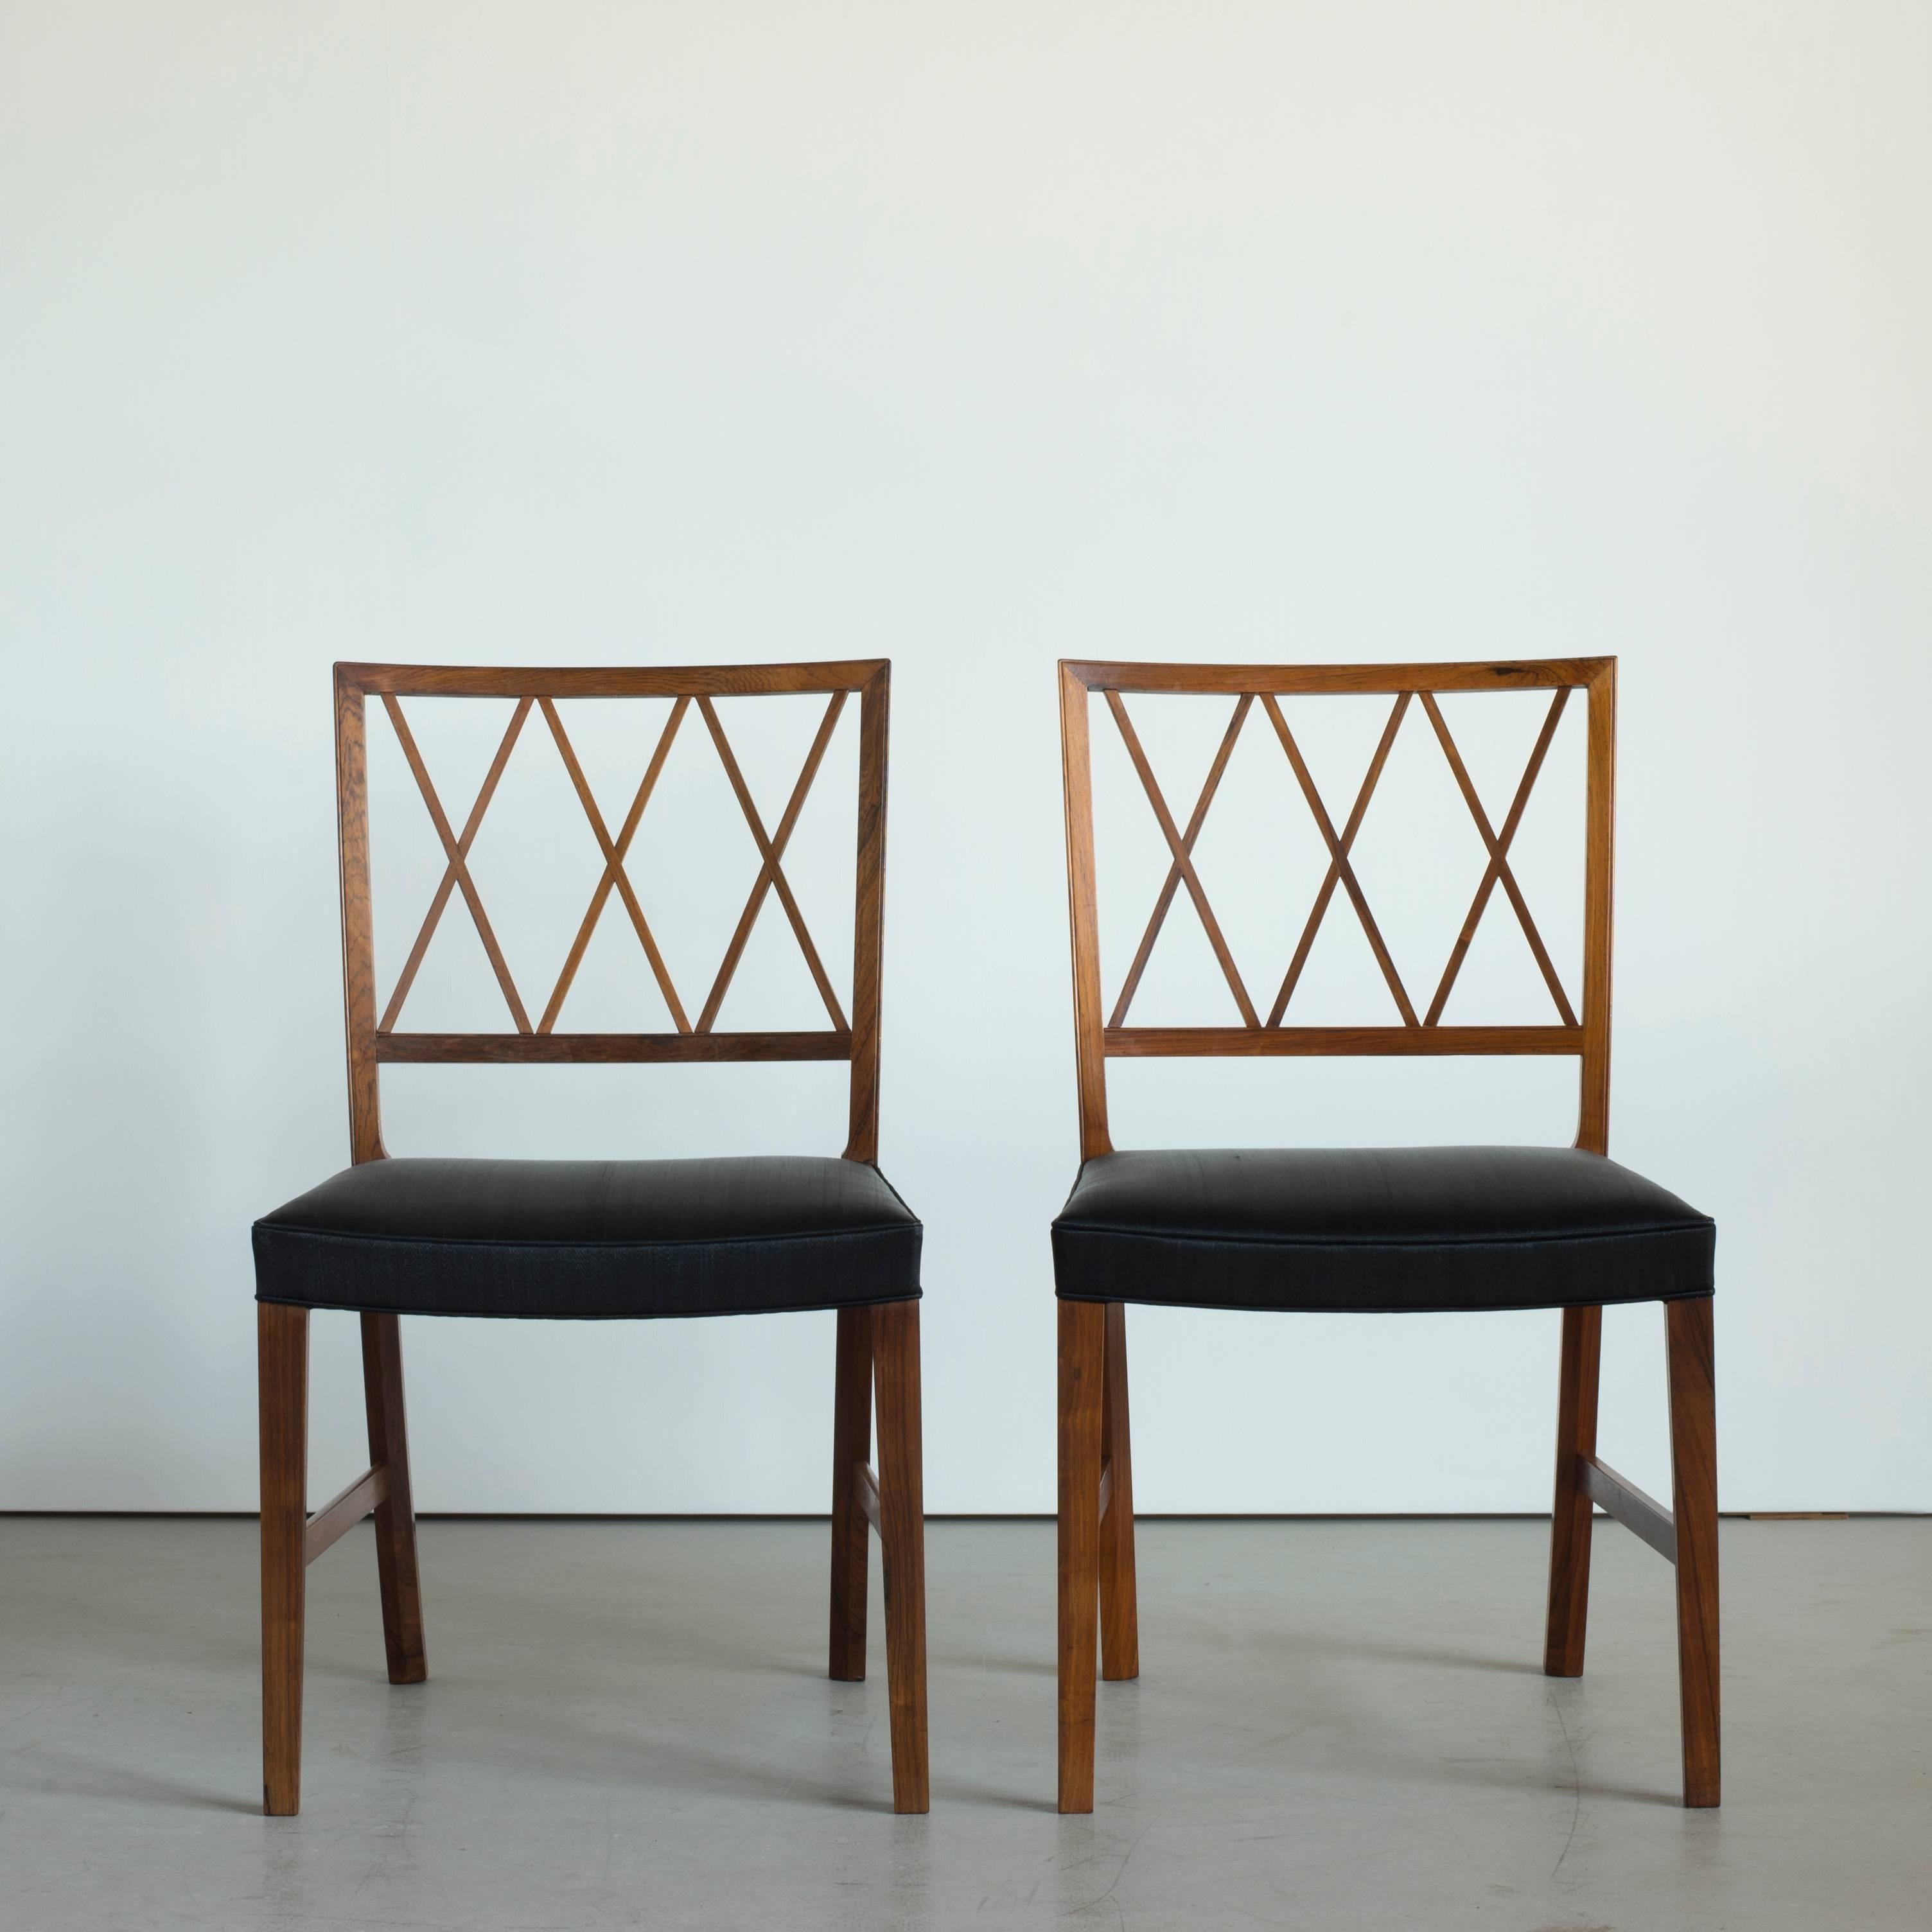 Set of six dining chairs by Ole Wanscher. Executed by A. J. Iversen for Illums Bolighus, Copenhagen.

Rosewood and black horsehair.

12 chairs and matching dining table available.